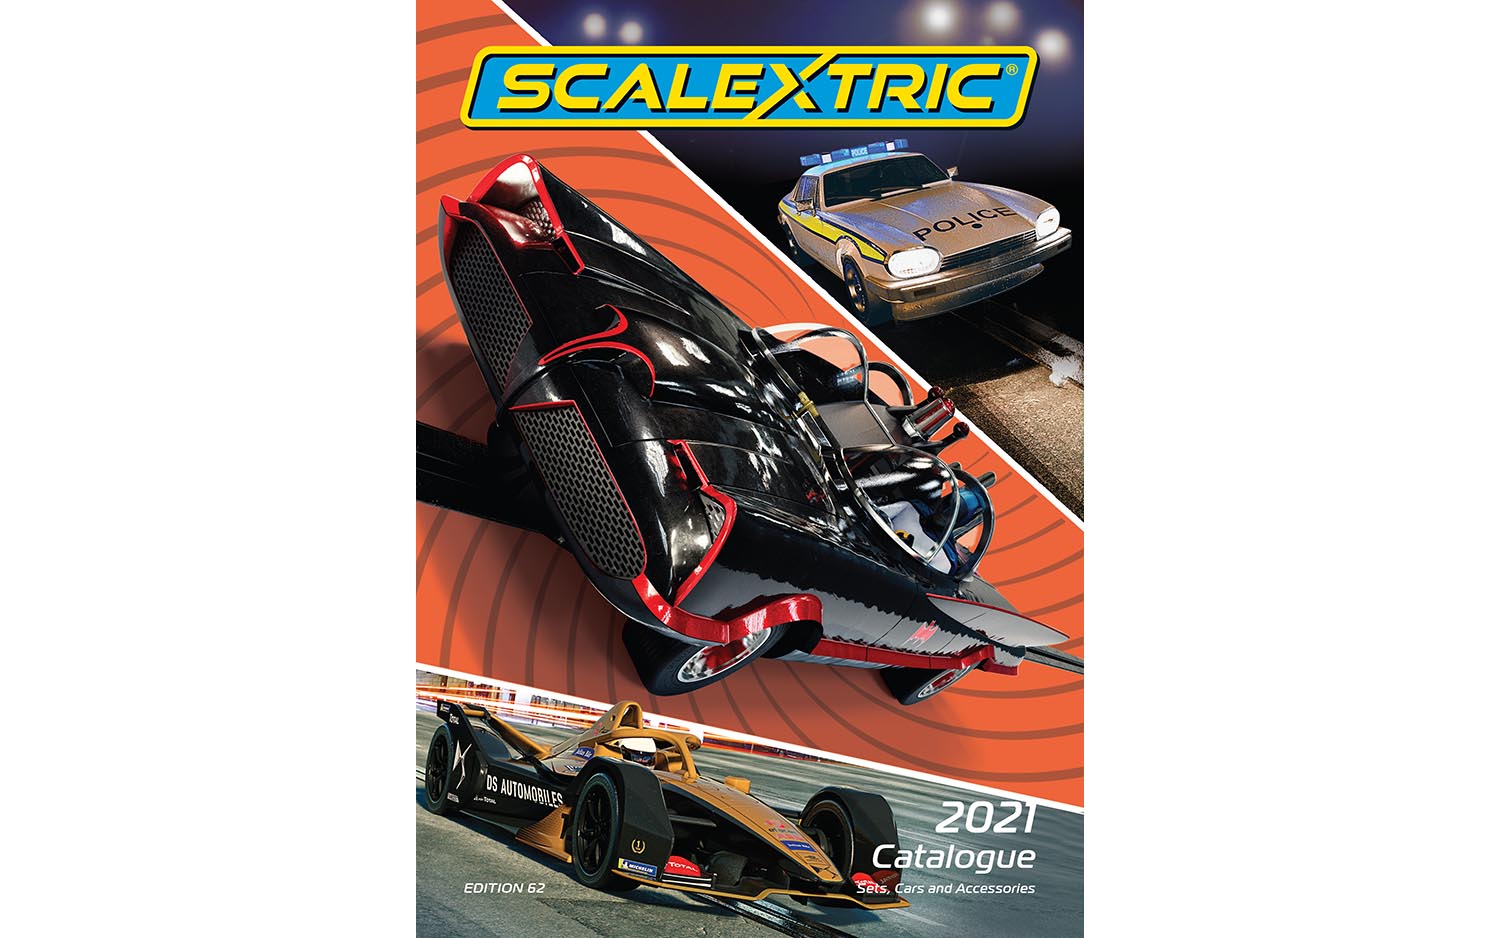 Scalextric 2021 Catalogue